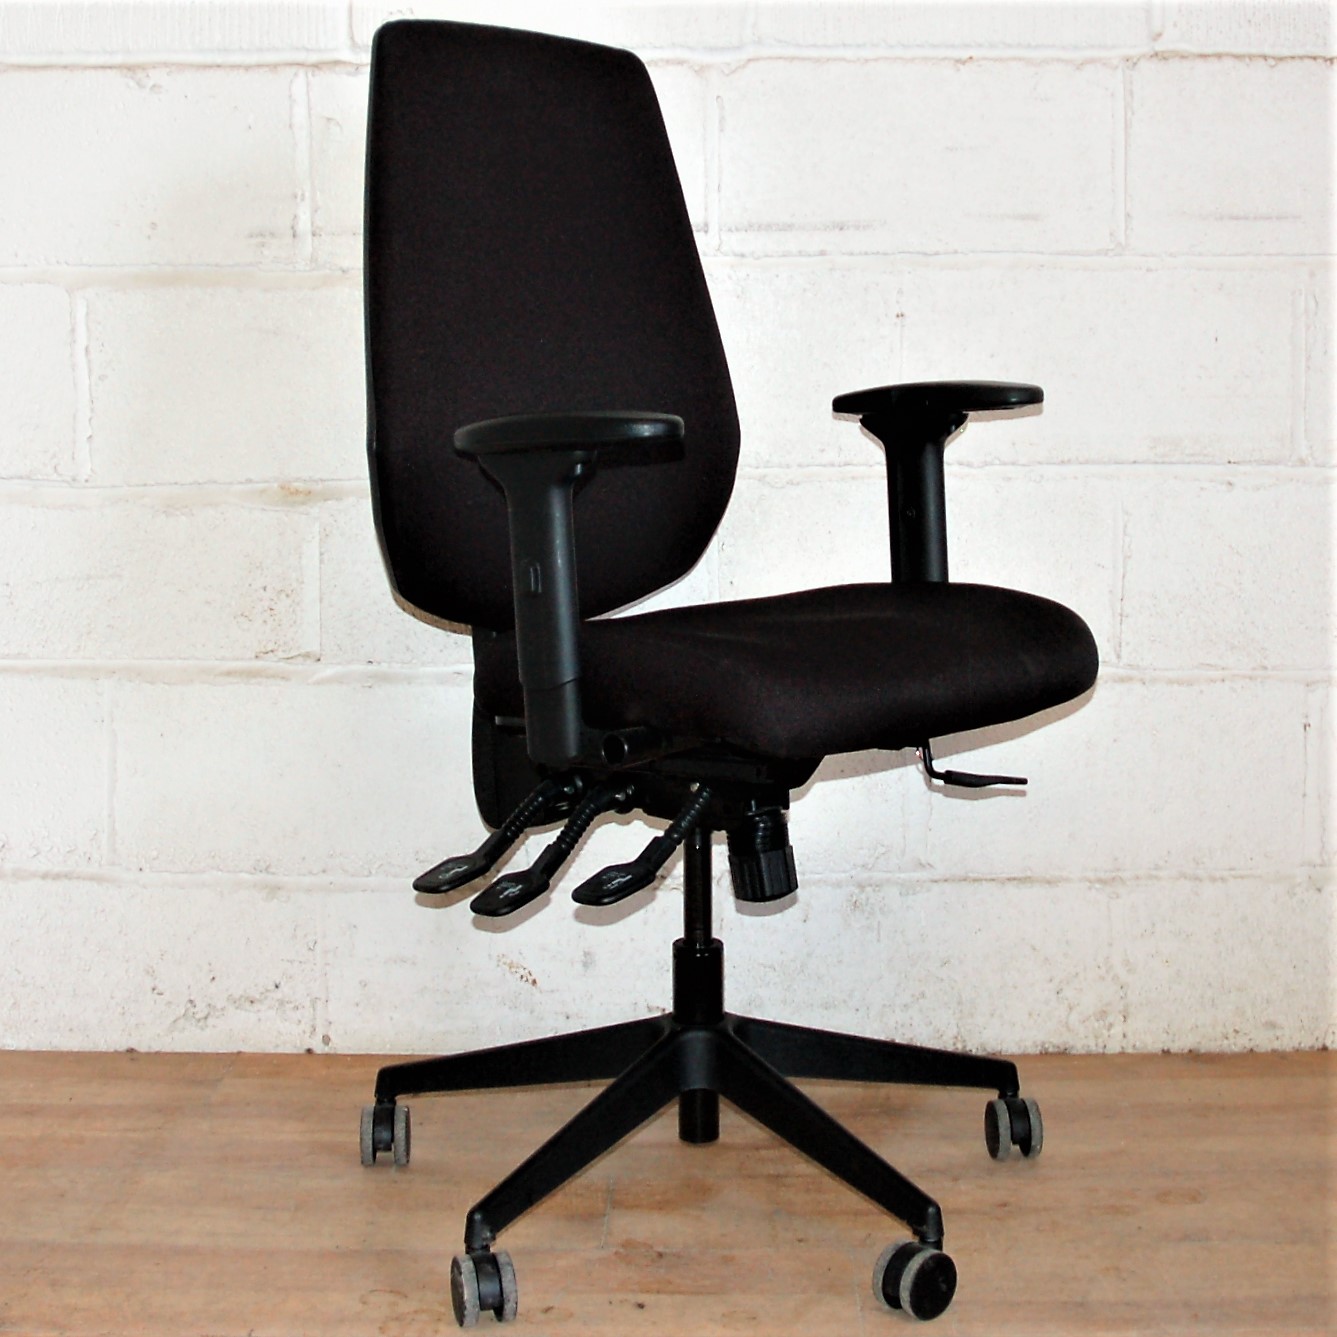 Modern Operators Task Chair Black 2143 | Office Seating | Office Chairs